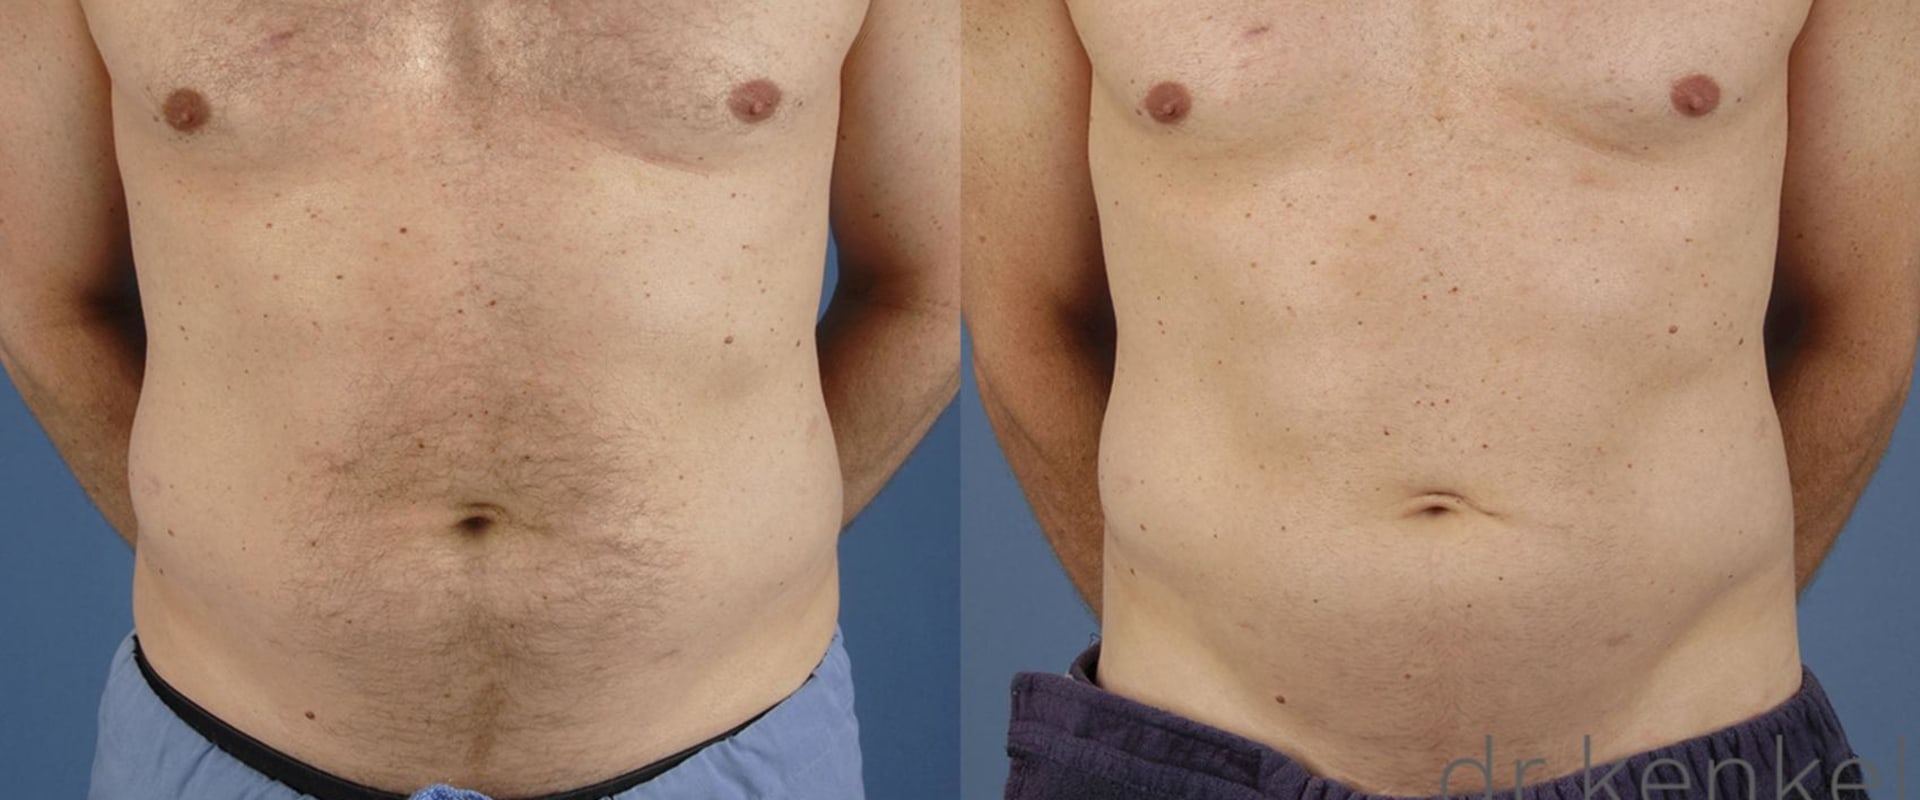 The Positive Effects Of Coolsculpting On Your Mind And Body Wellness In Dallas, TX